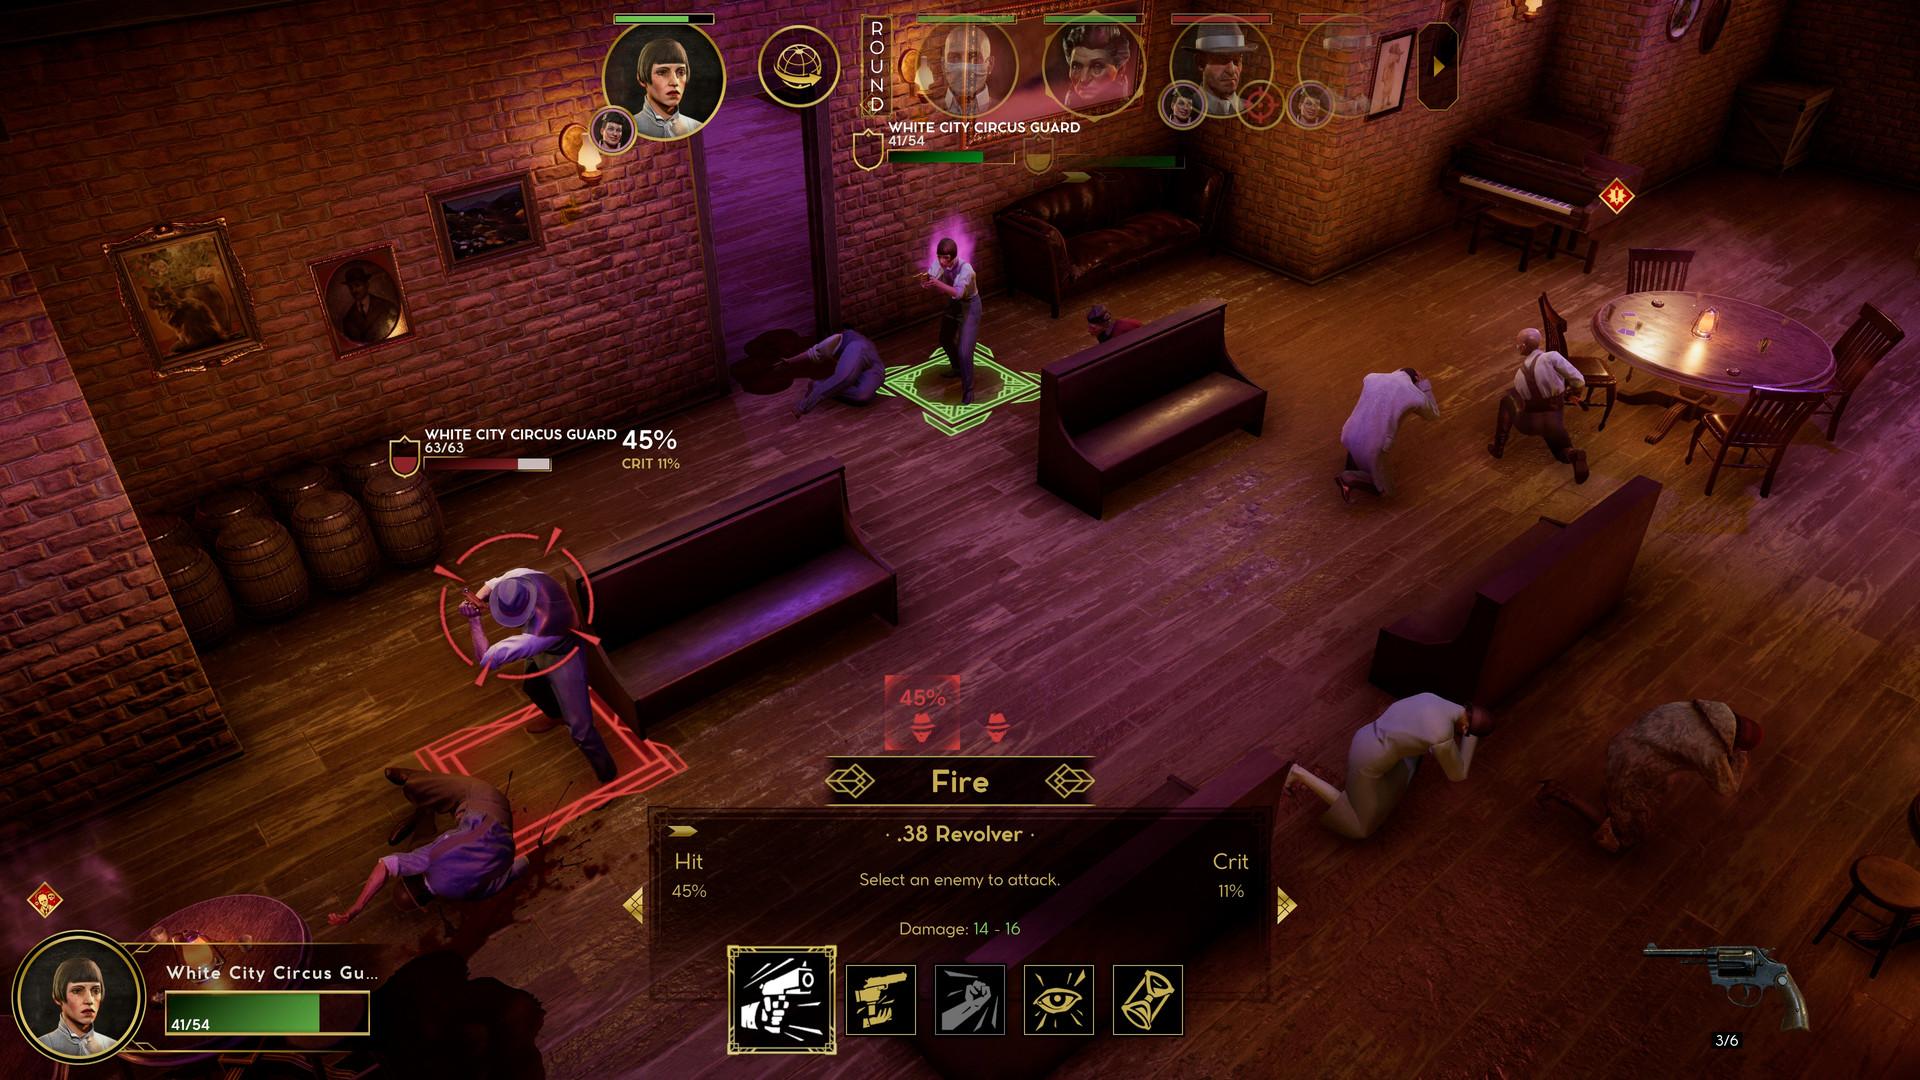 Screenshot №10 from game Empire of Sin